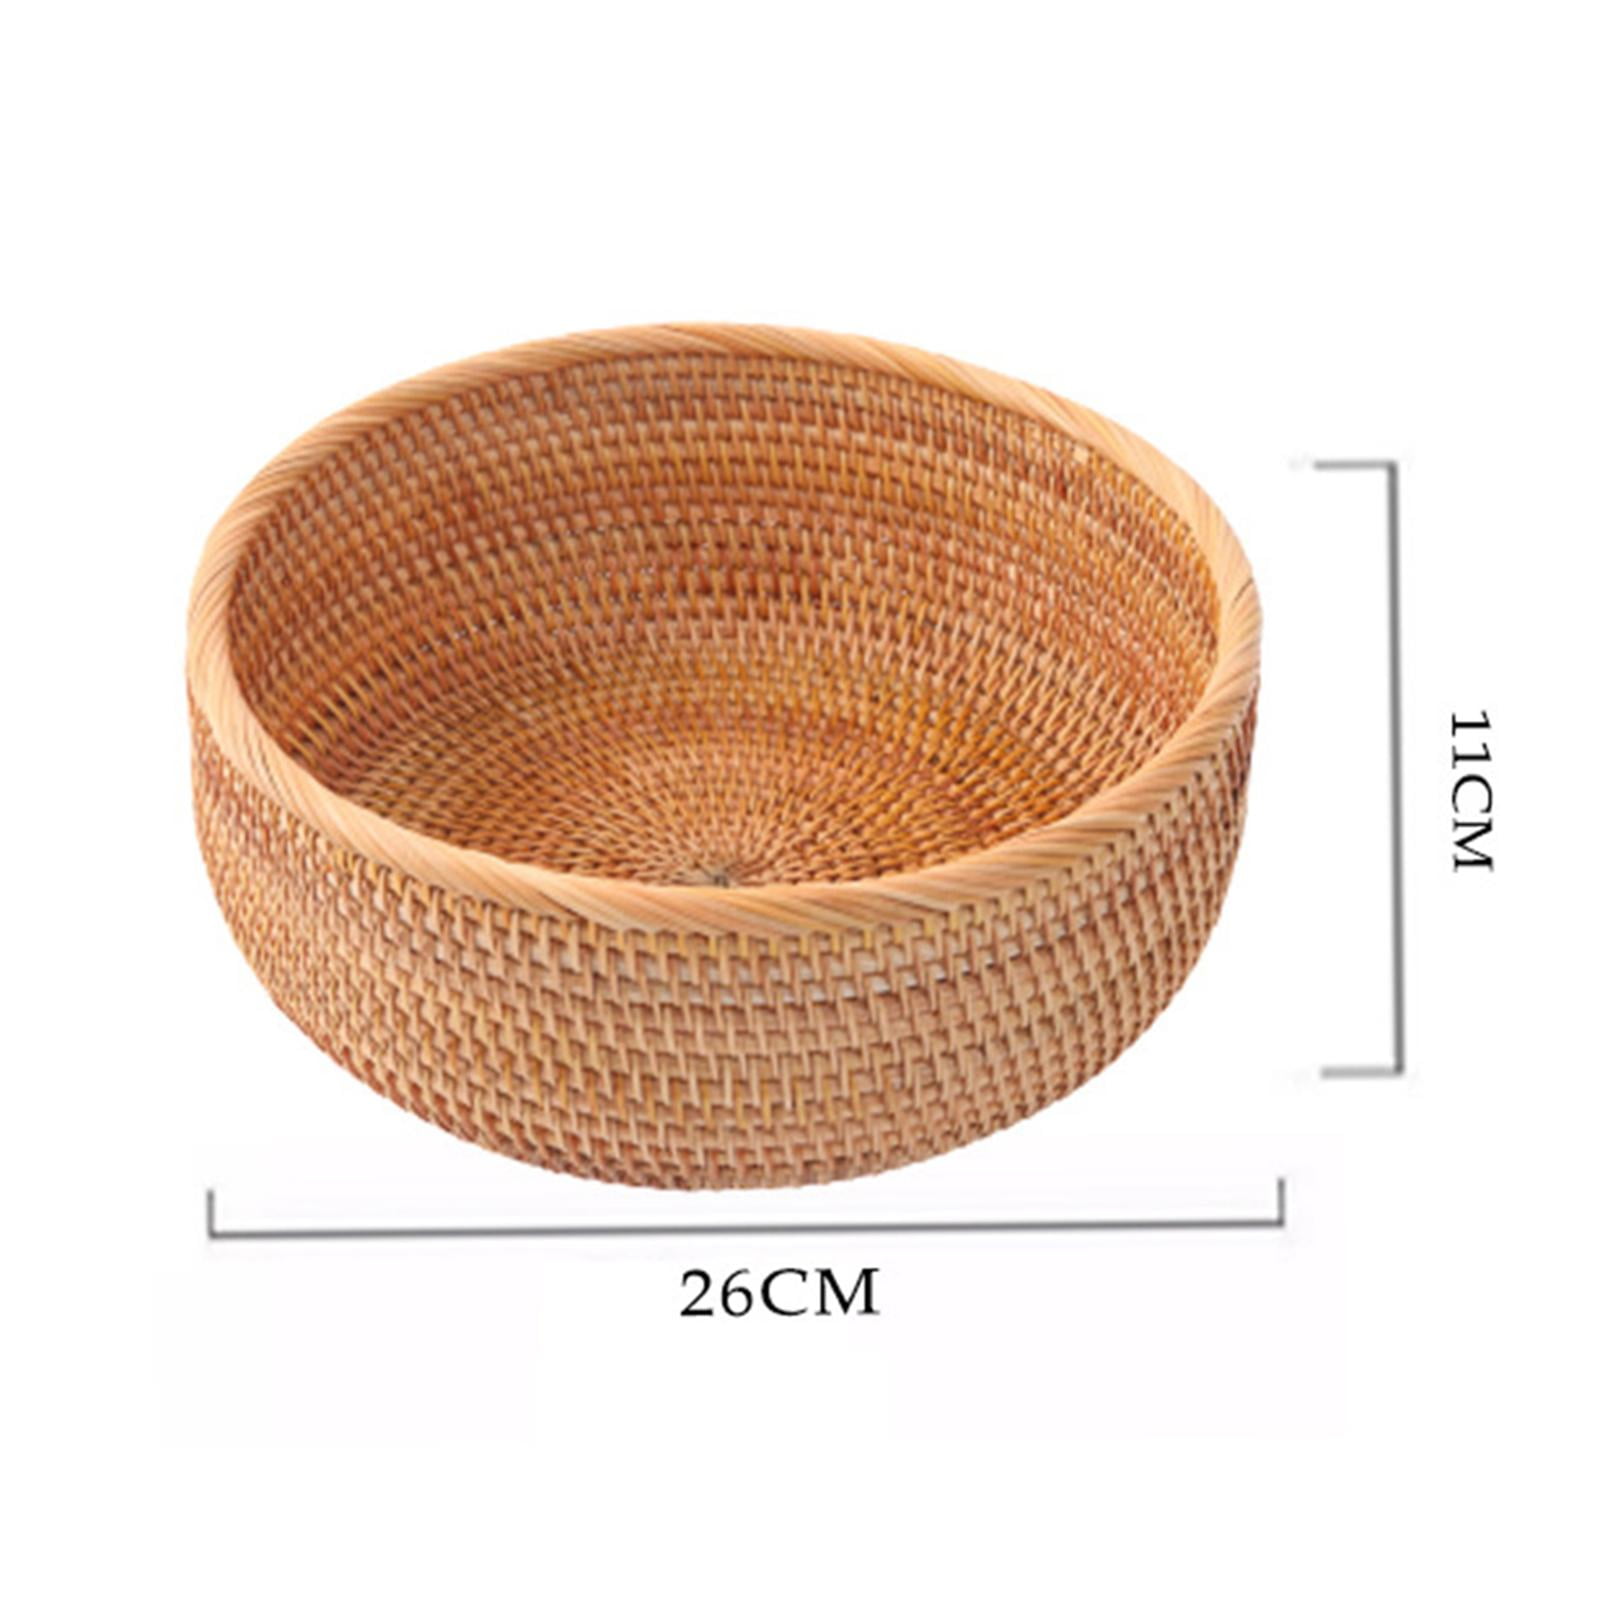 Angoily 2pcs Chips Snack Basket Fried Food Container Containers Metal  Hanging Storage Bin Metal Storage Bin Fruit Basket Round Basket Tray Oval  Tray